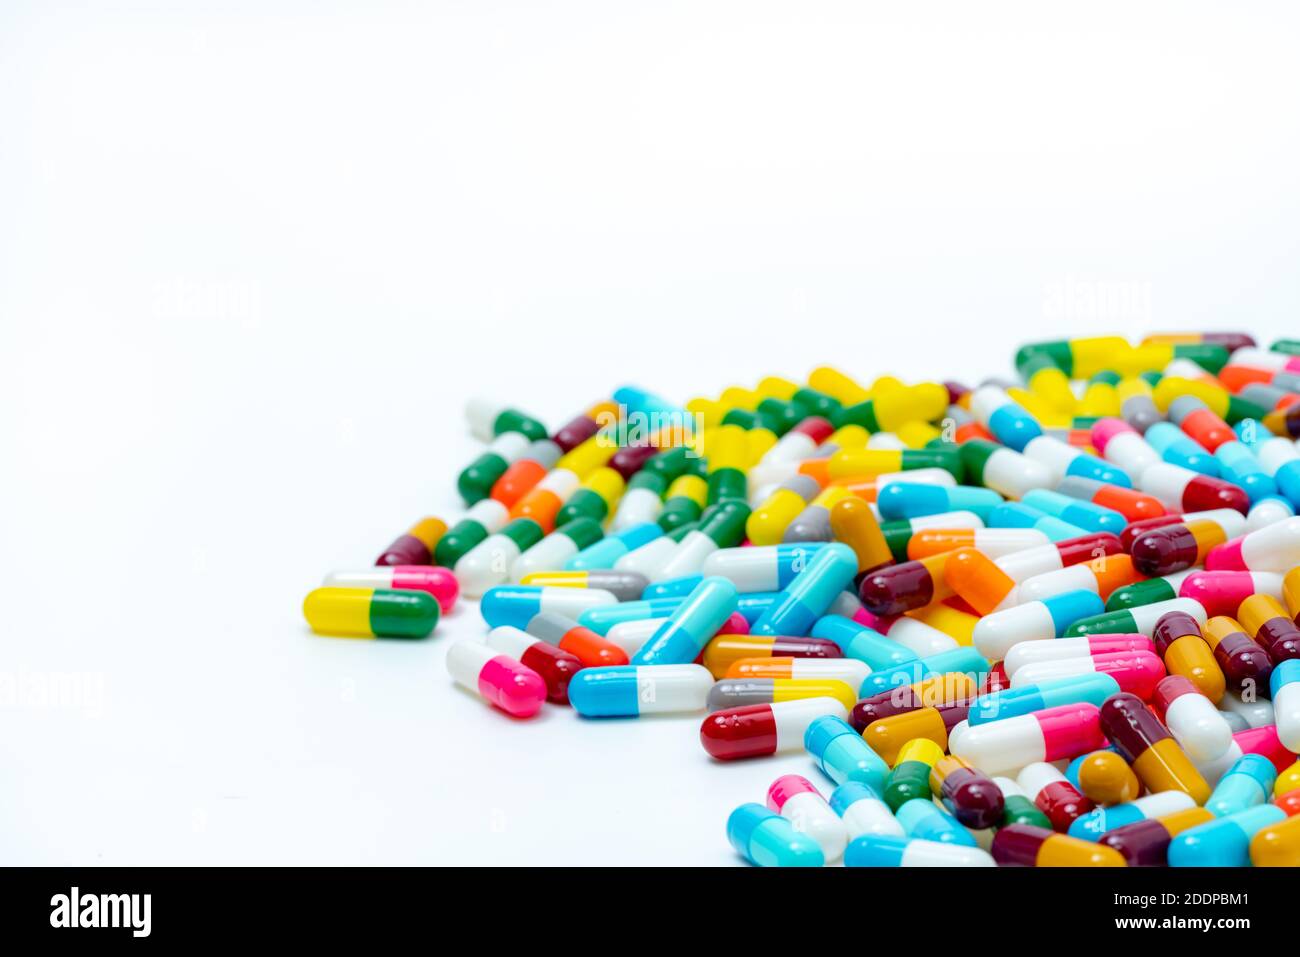 Heap of multi-colored antibiotic capsule pills on white background. Antibiotic drug resistance. Antimicrobial drugs. Pharmaceutical industry. Stock Photo